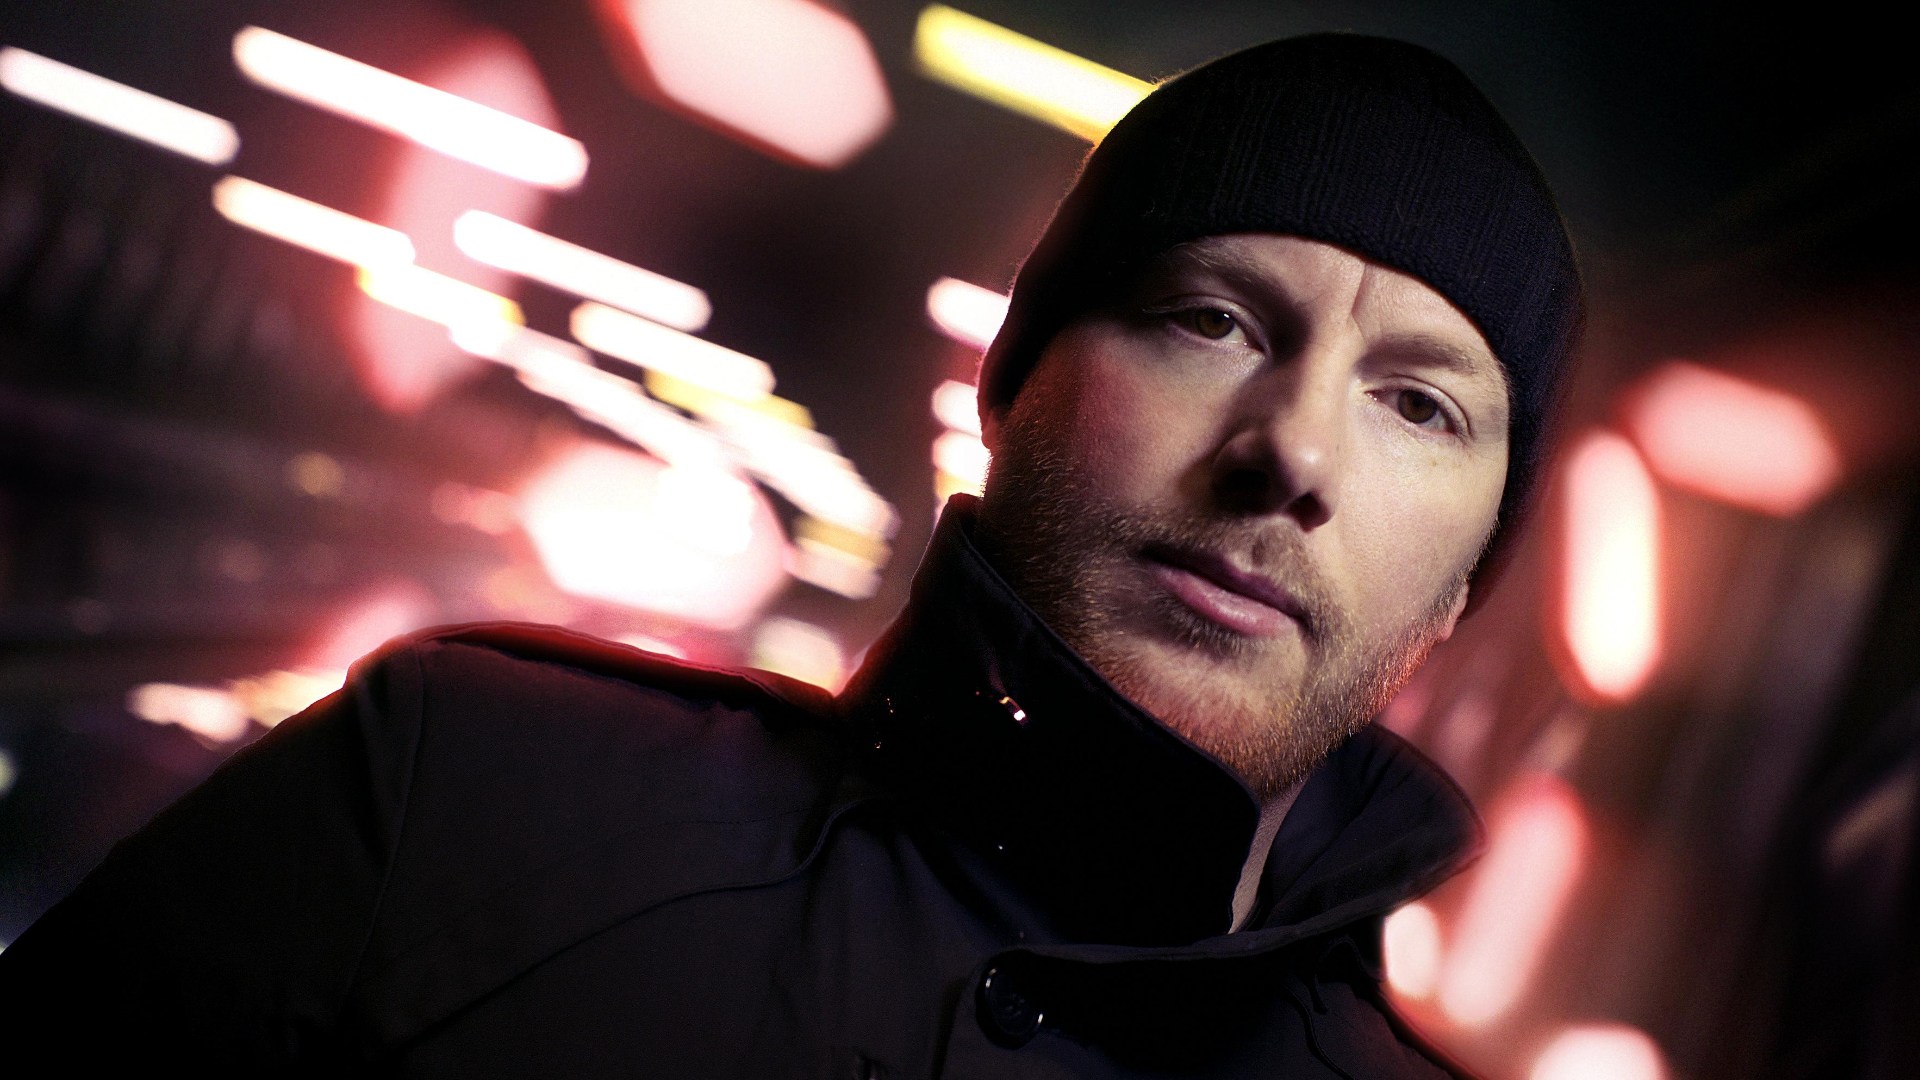 Extraordinary lineups for Eric Prydz’s new audio-visual experience